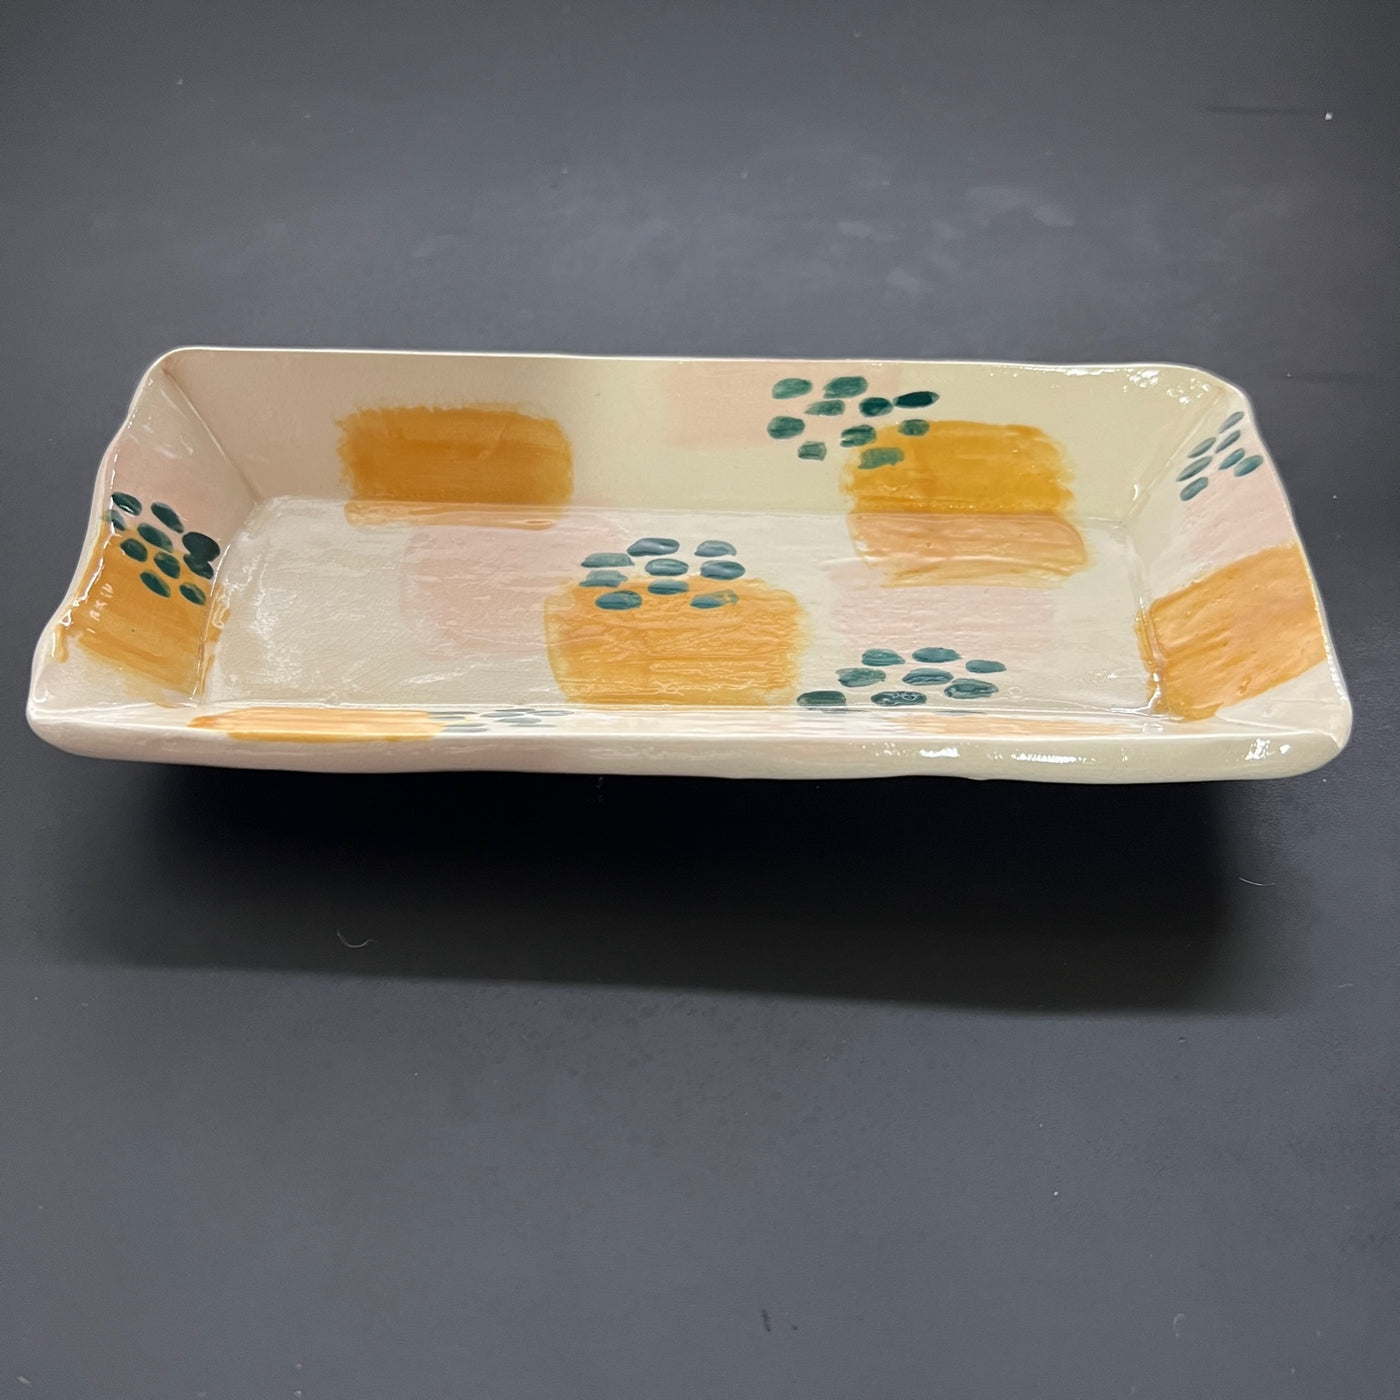 Handcrafted Catch-All Dish Orange / Black Dots